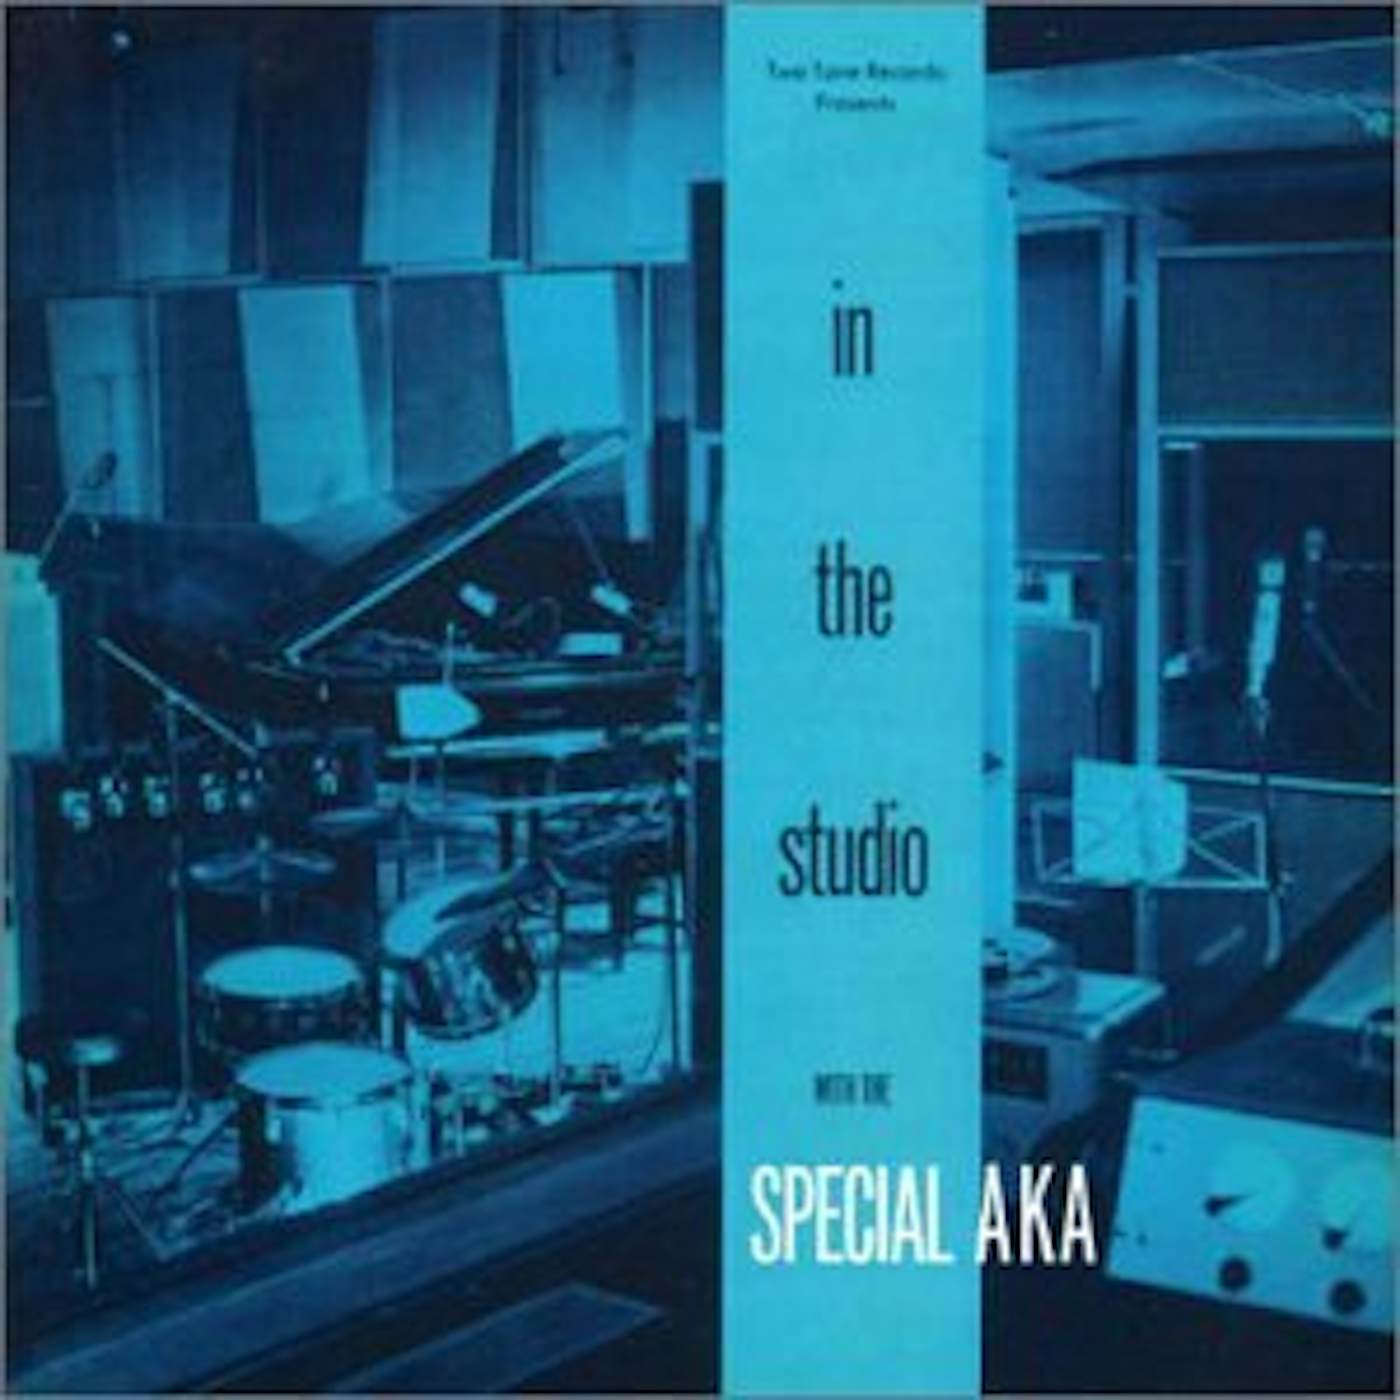 The Specials IN THE STUDIO CD